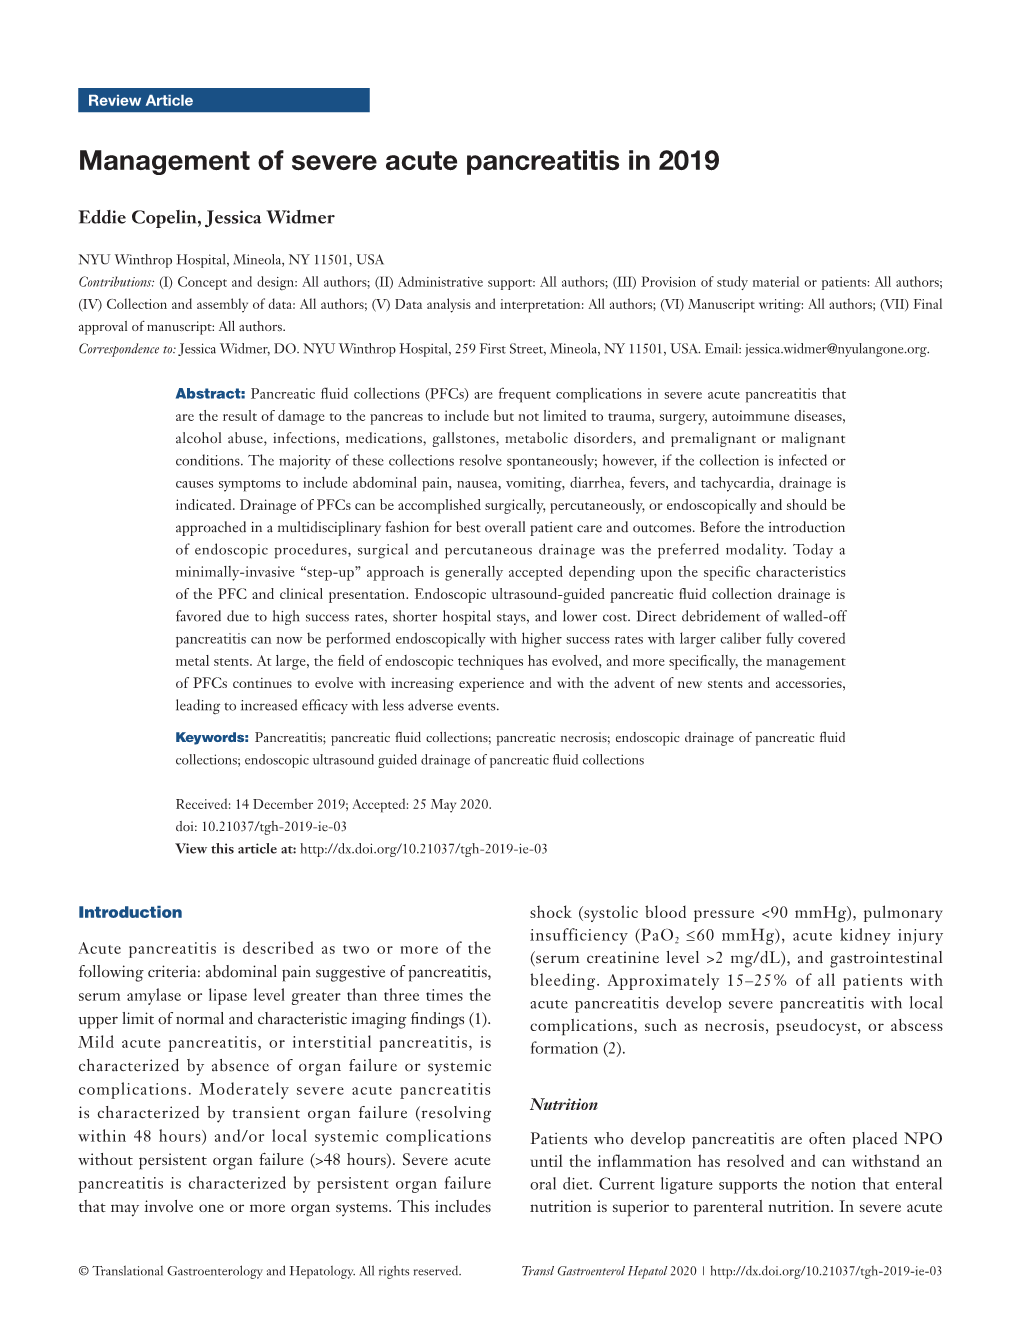 Management of Severe Acute Pancreatitis in 2019